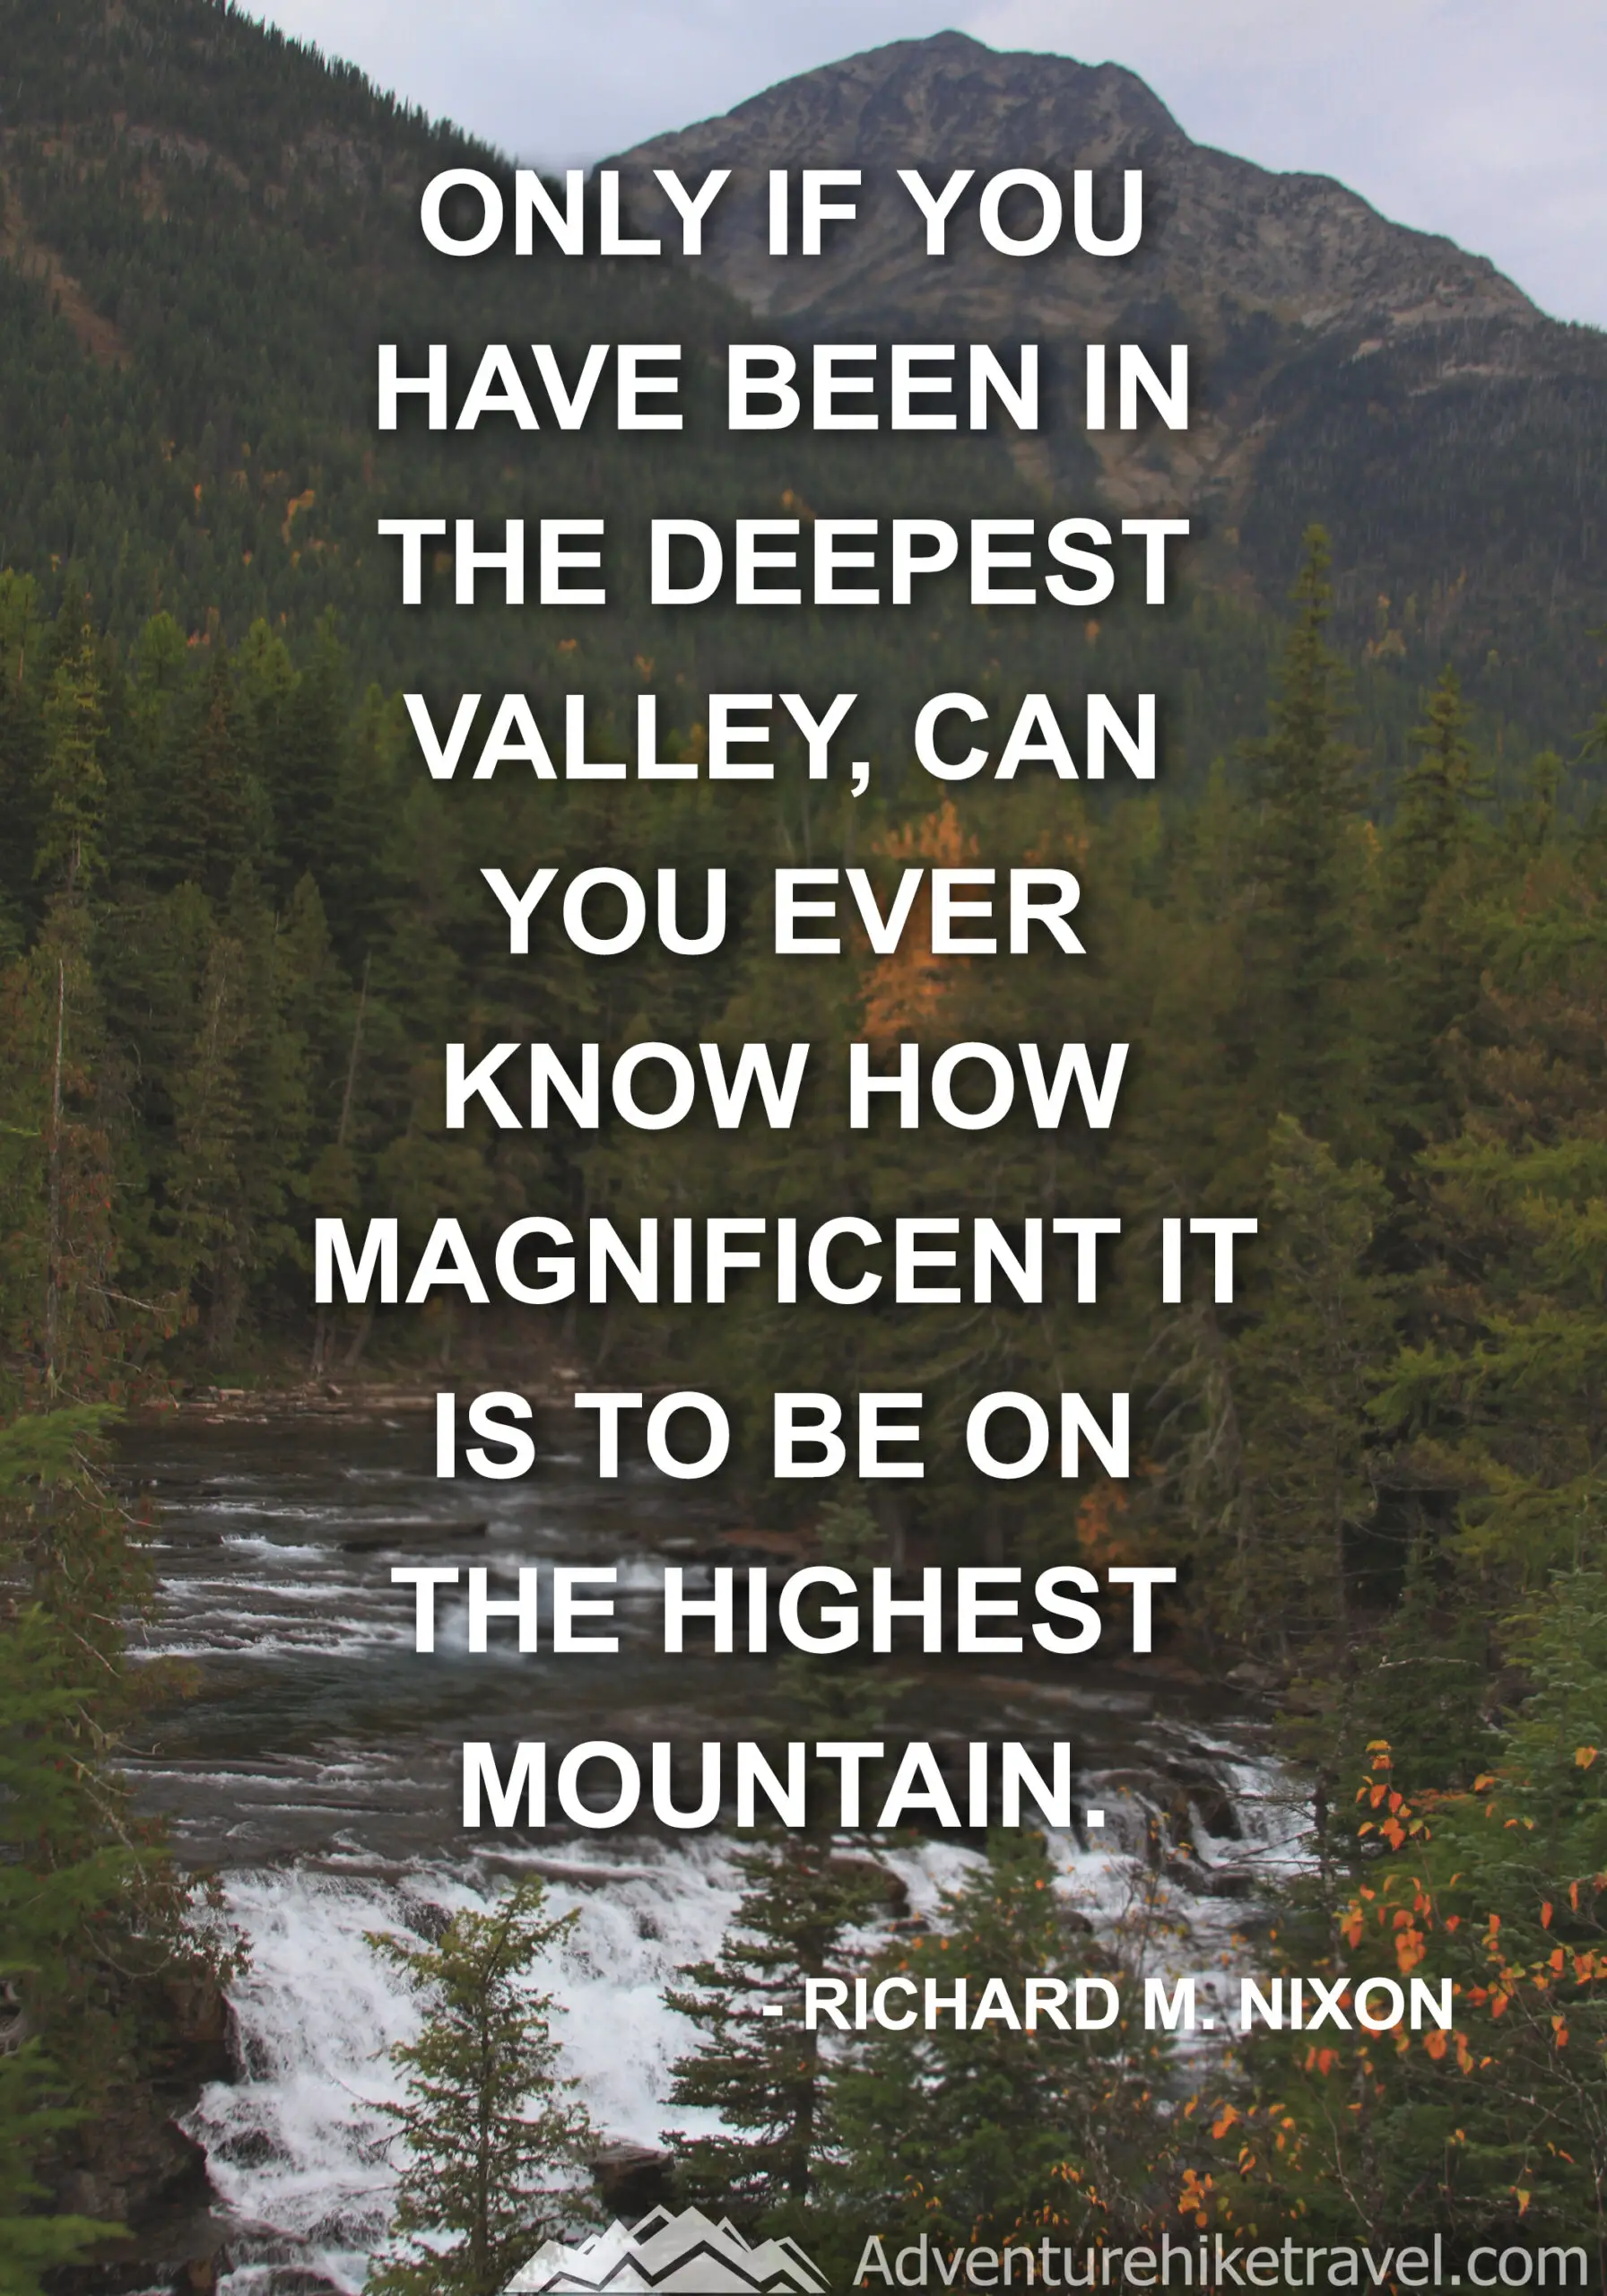 "Only if you have been in the deepest valley, can you ever know how magnificent it is to be on the highest mountain." -Richard M. Nixon #hiking #quotes #inspirationalquotes #hikingquotes #adventurequotes #outdoors #trekking